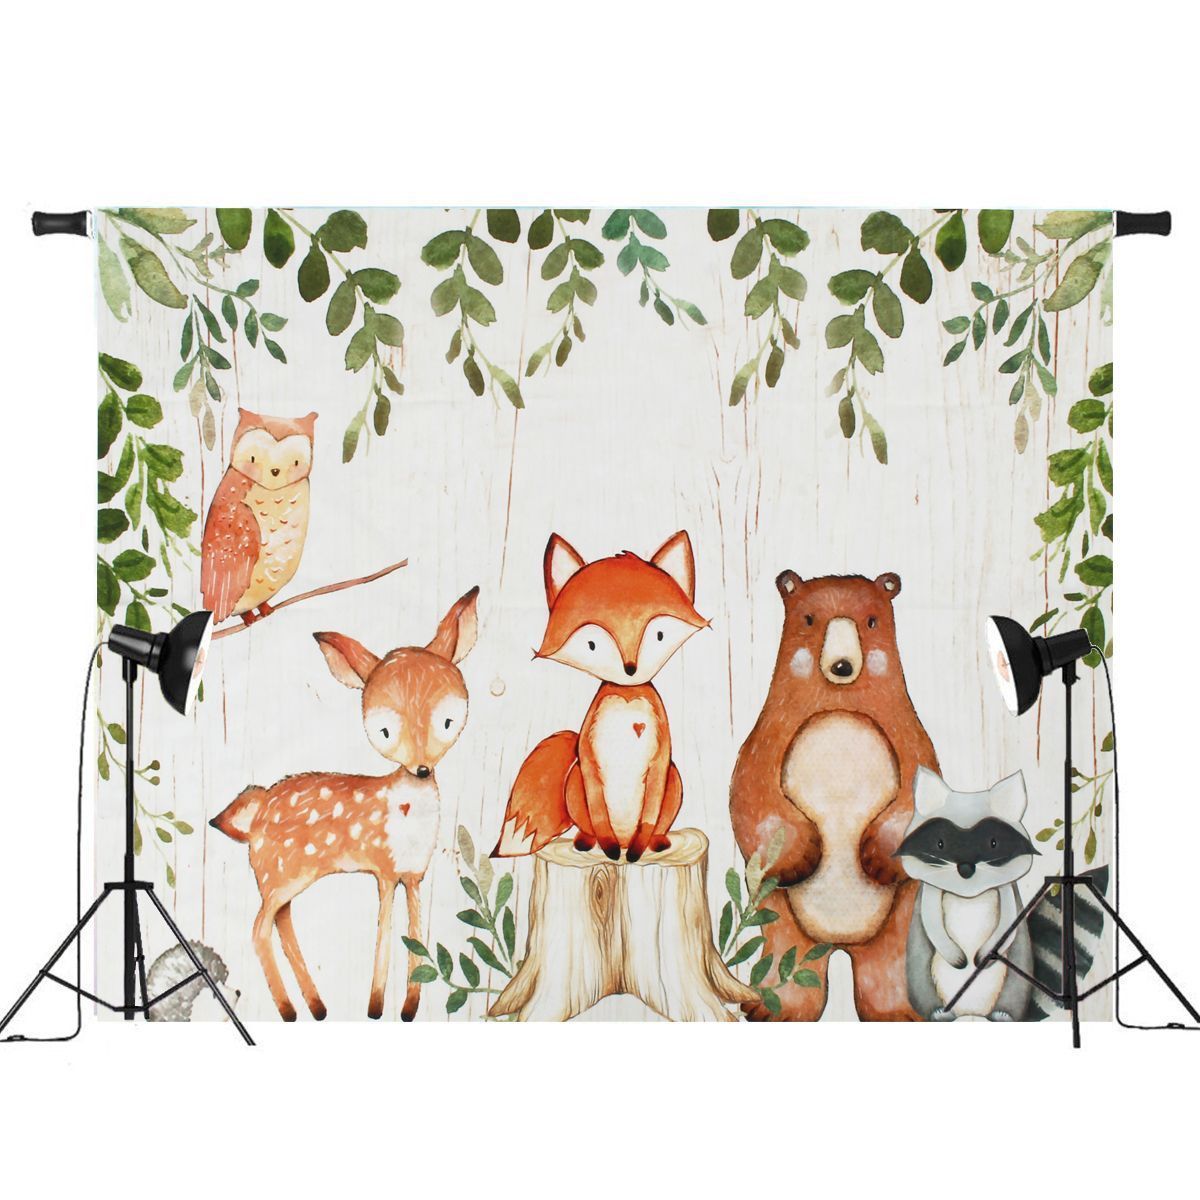 Baby-Photography-Backdrop-Woodland-Animals-Birthday-Party-Background-Prop-Vinyl-Decorations-1541936